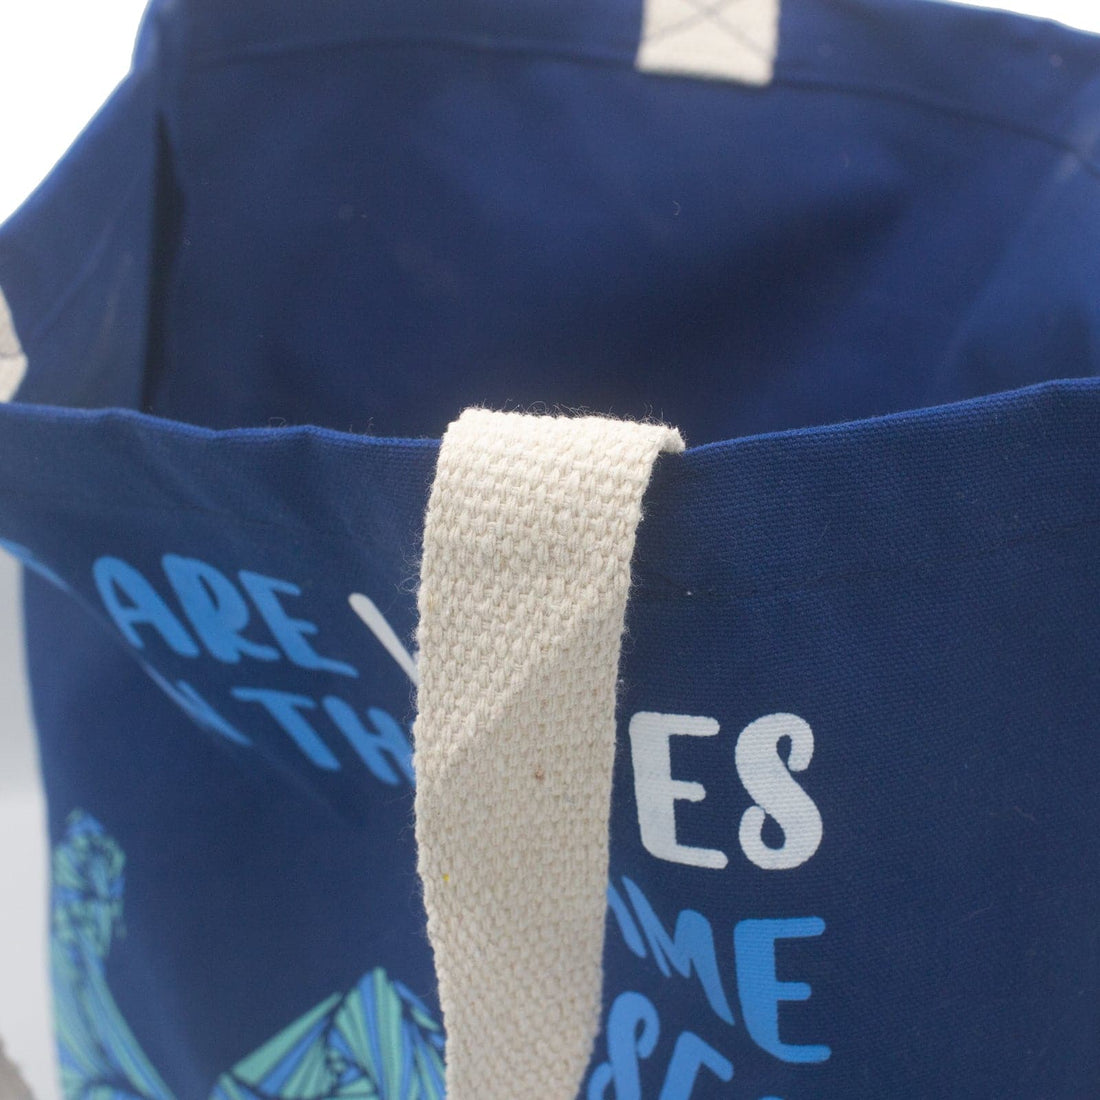 Printed Cotton Bag - We are Waves - Blue - best price from Maltashopper.com PCB-01B